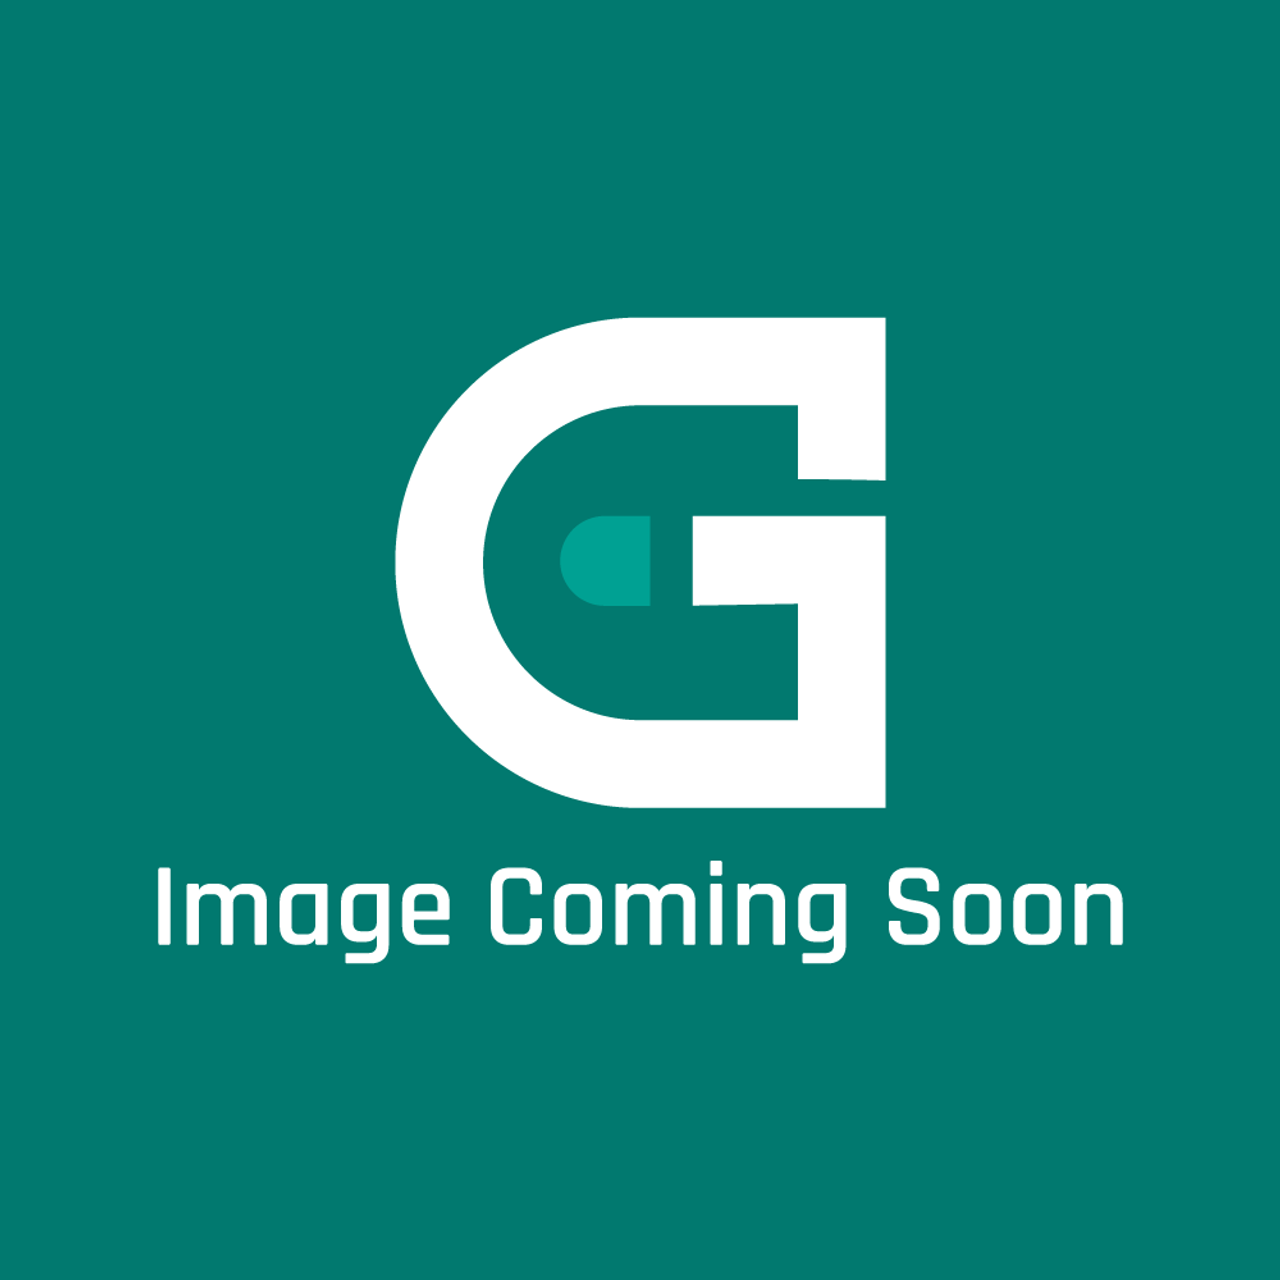 Frigidaire - Electrolux 5304500742 Sleeve - Image Coming Soon!